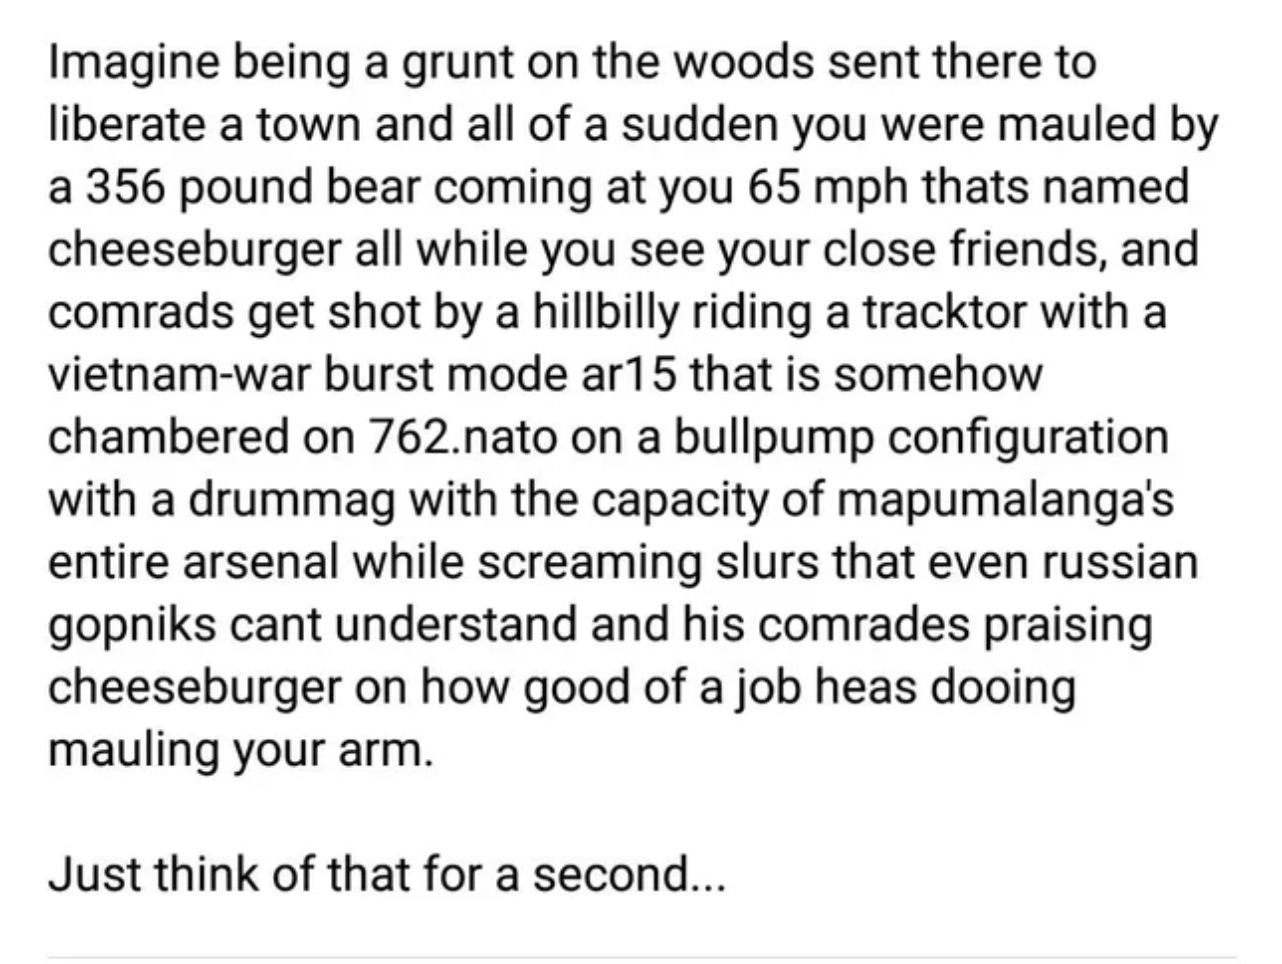 Oddly Specific Pictures - Imagine being a grunt on the woods sent there to liberate a town and all of a sudden you were mauled by a 356 pound bear coming at you 65 mph thats named cheeseburger all while you see your close friends, and comrads get shot by